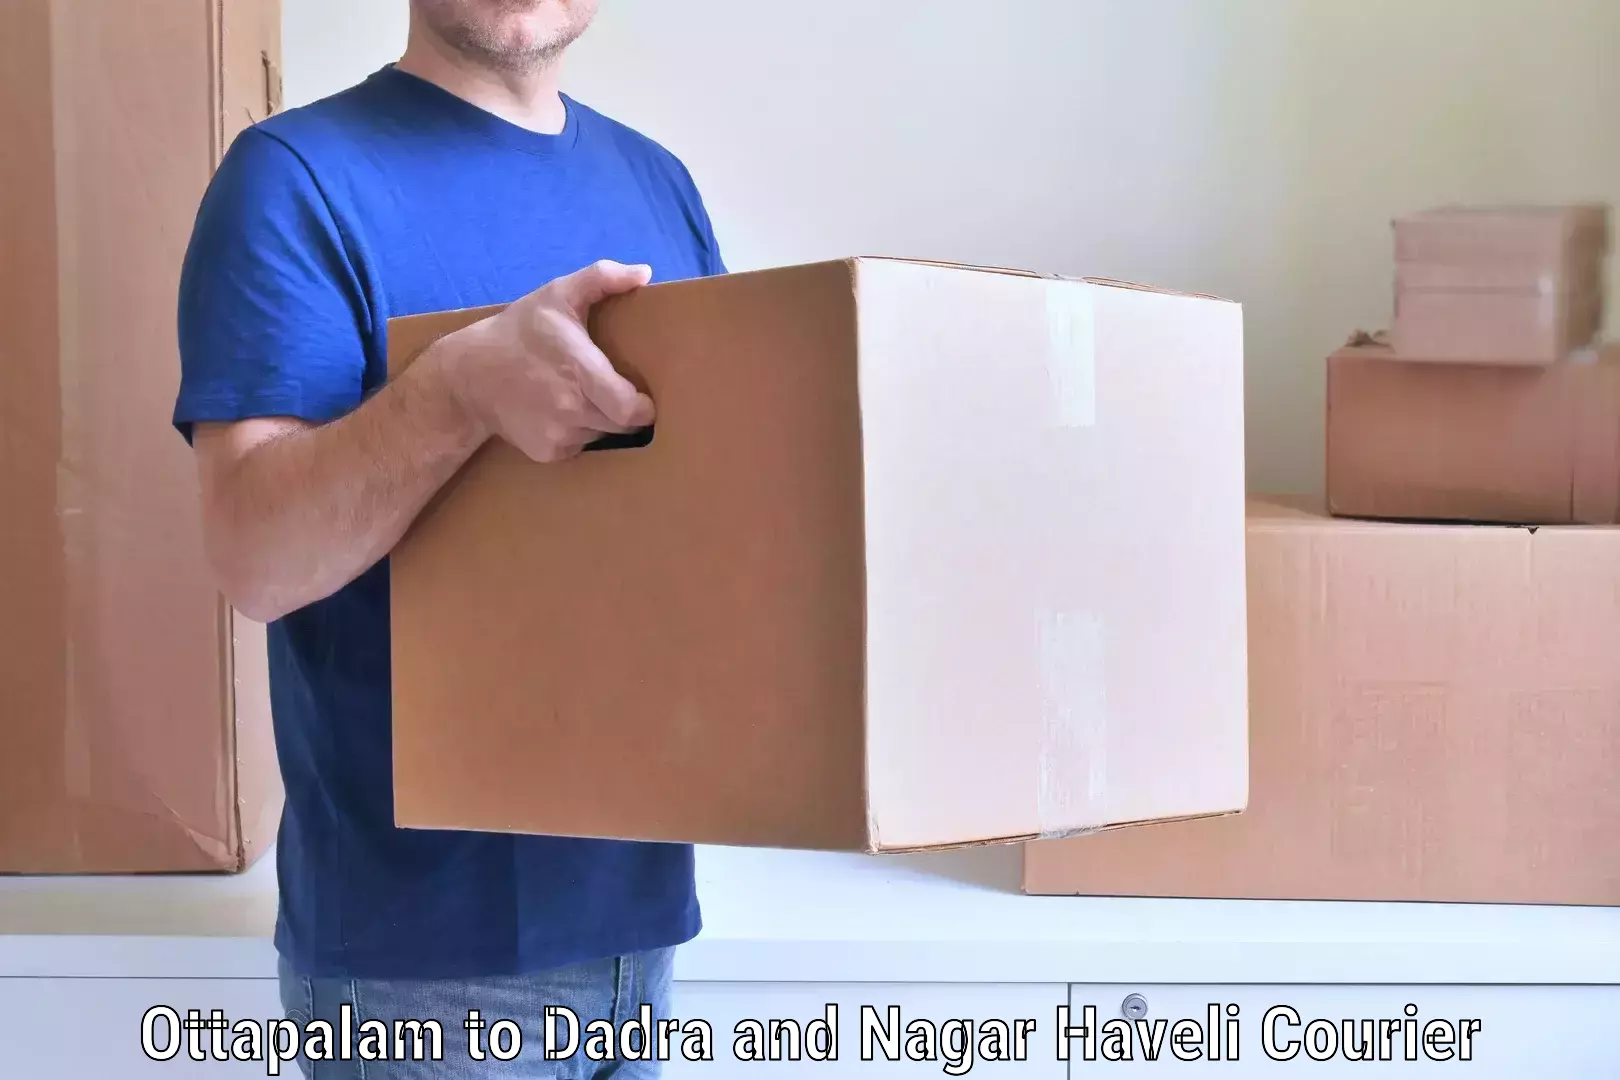 Professional movers and packers Ottapalam to Dadra and Nagar Haveli